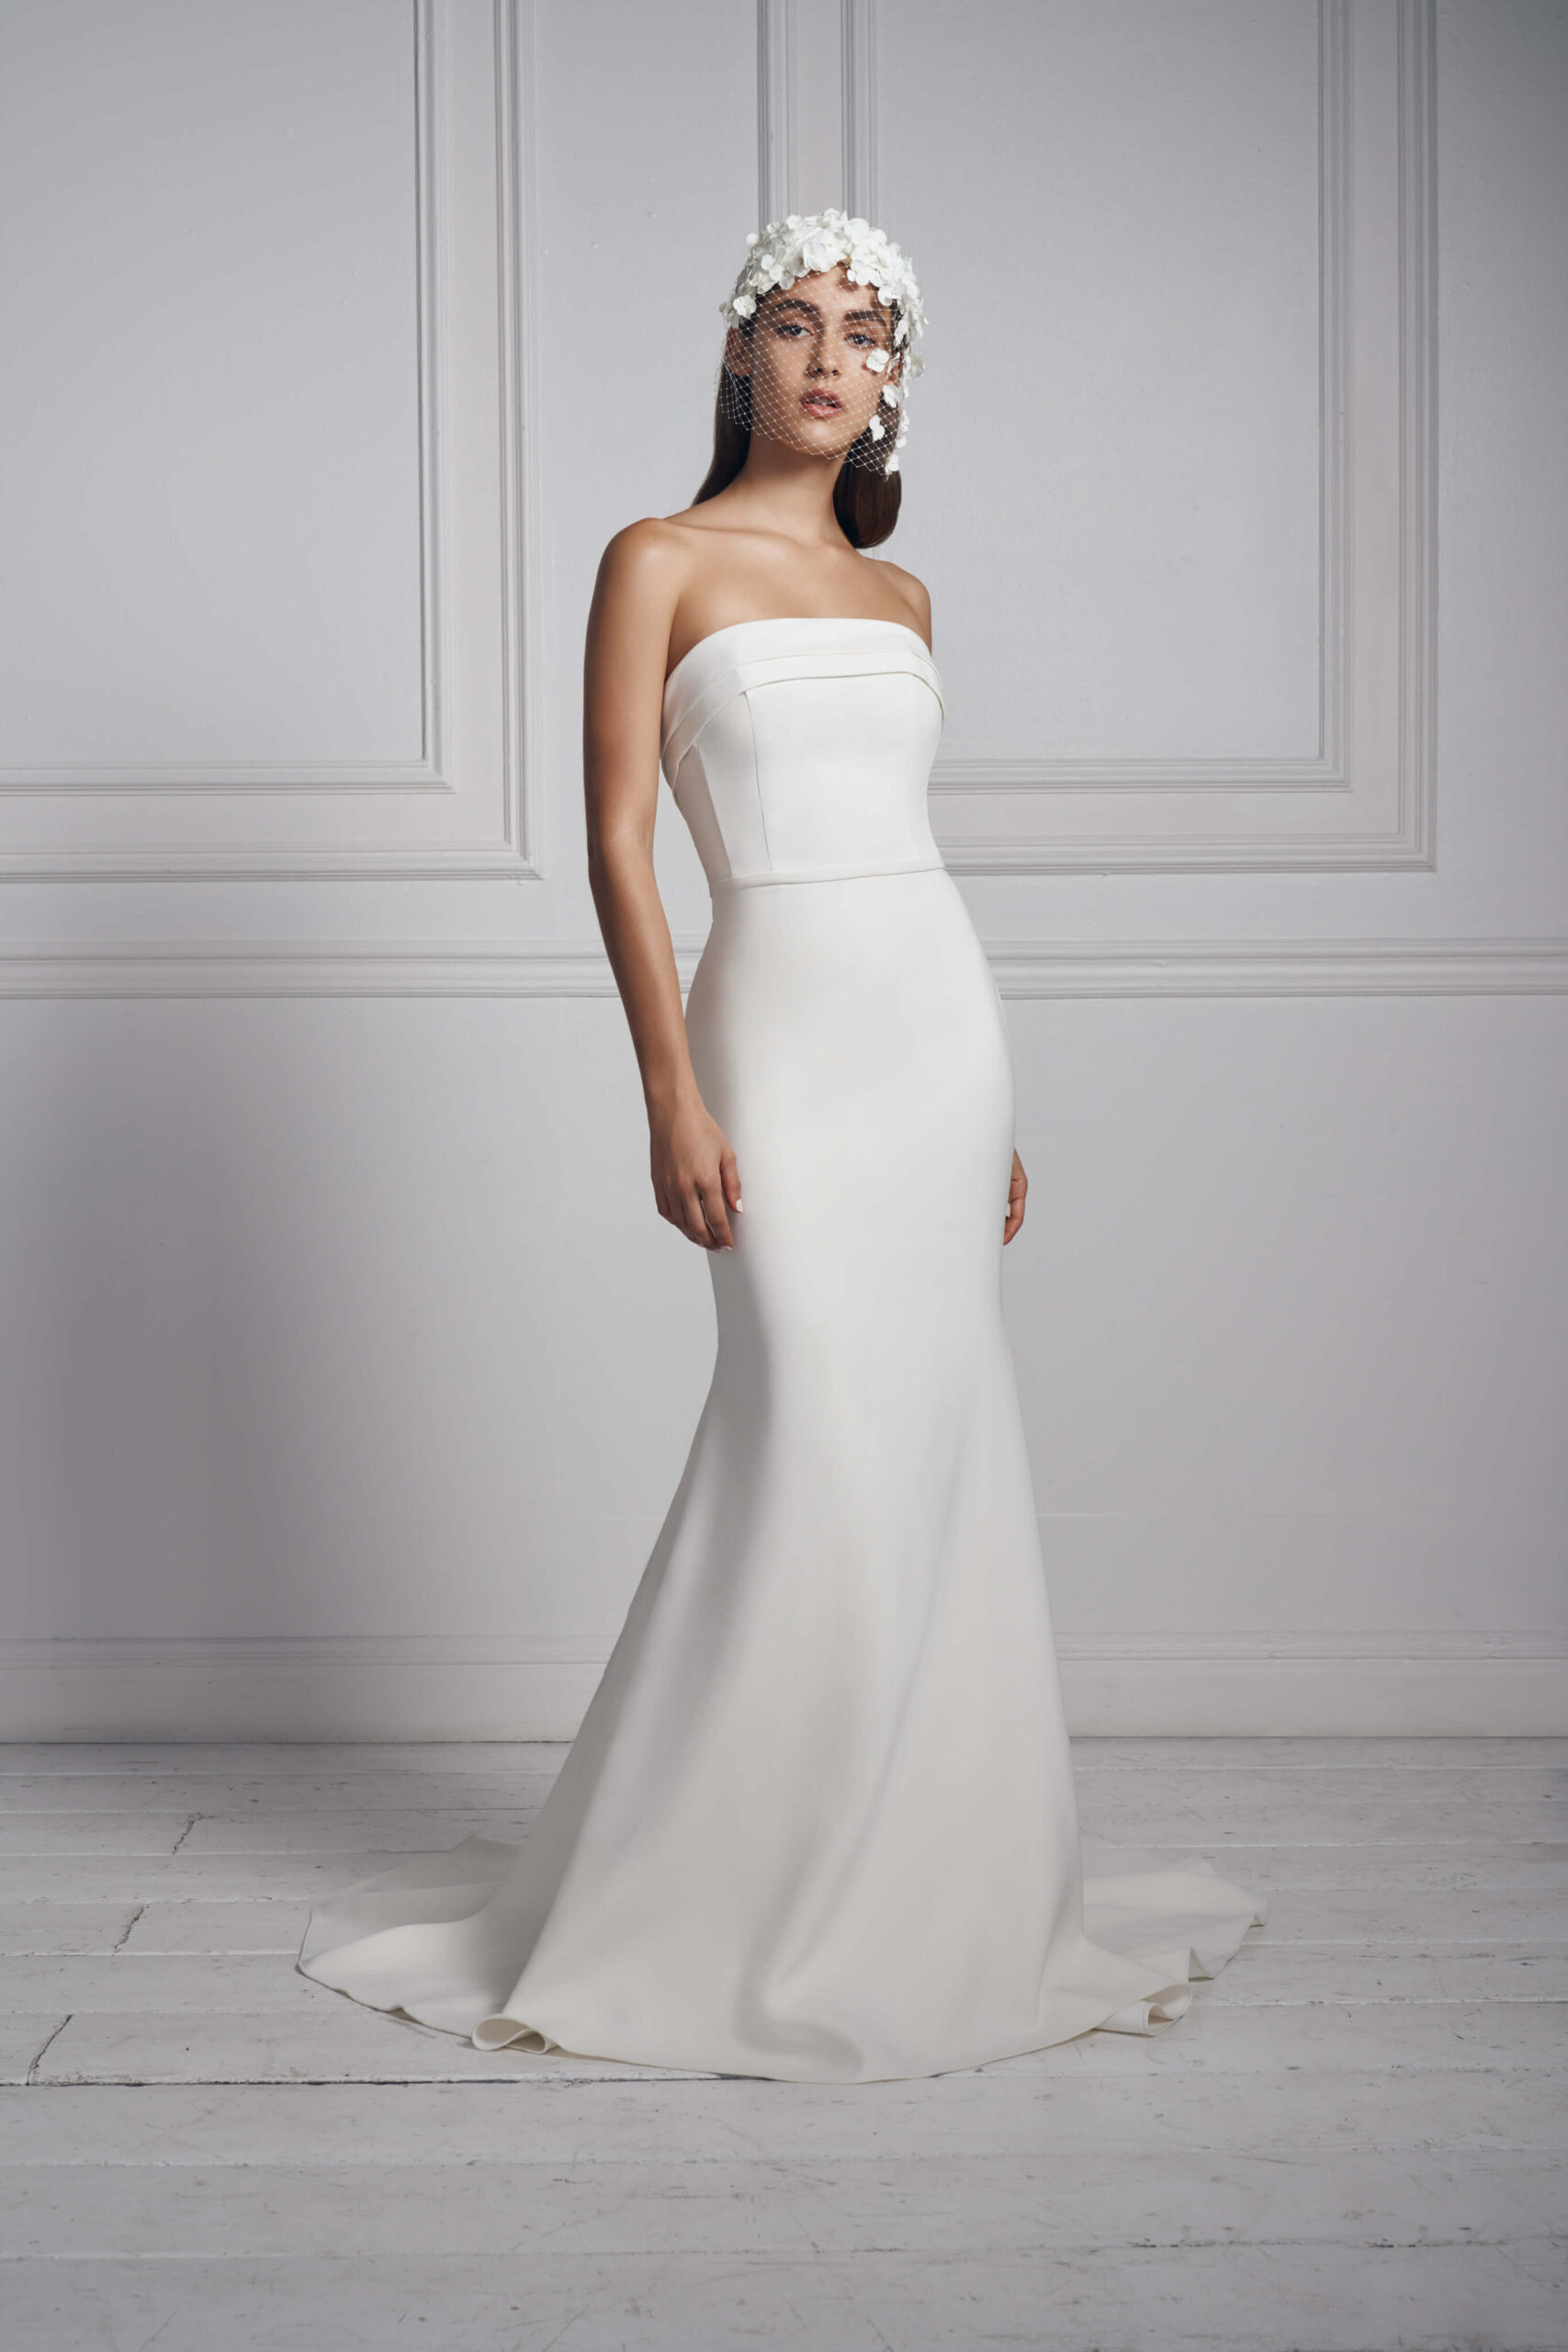 Anne Barge's columnar strapless bridal gown comes with arched pleated cuffs